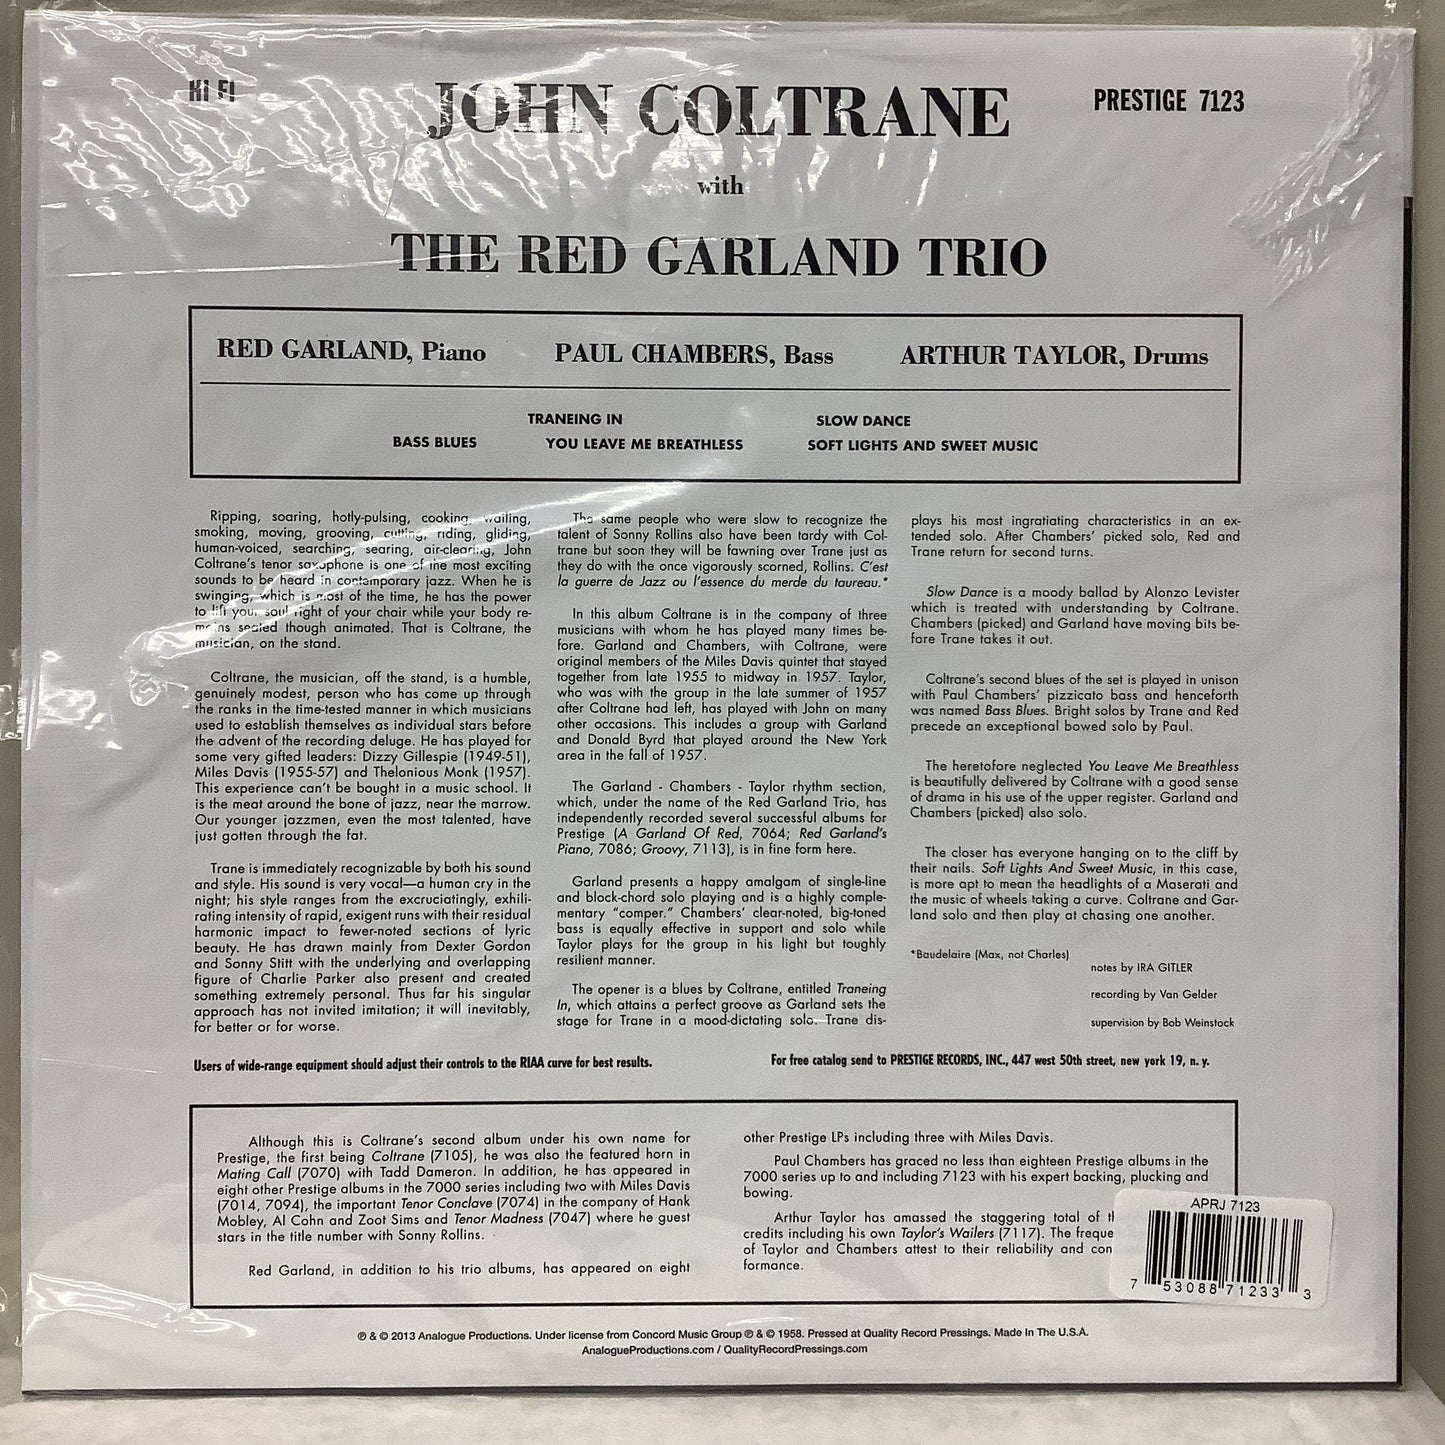 John Coltrane - With The Red Garland Trio - Analogue Productions LP